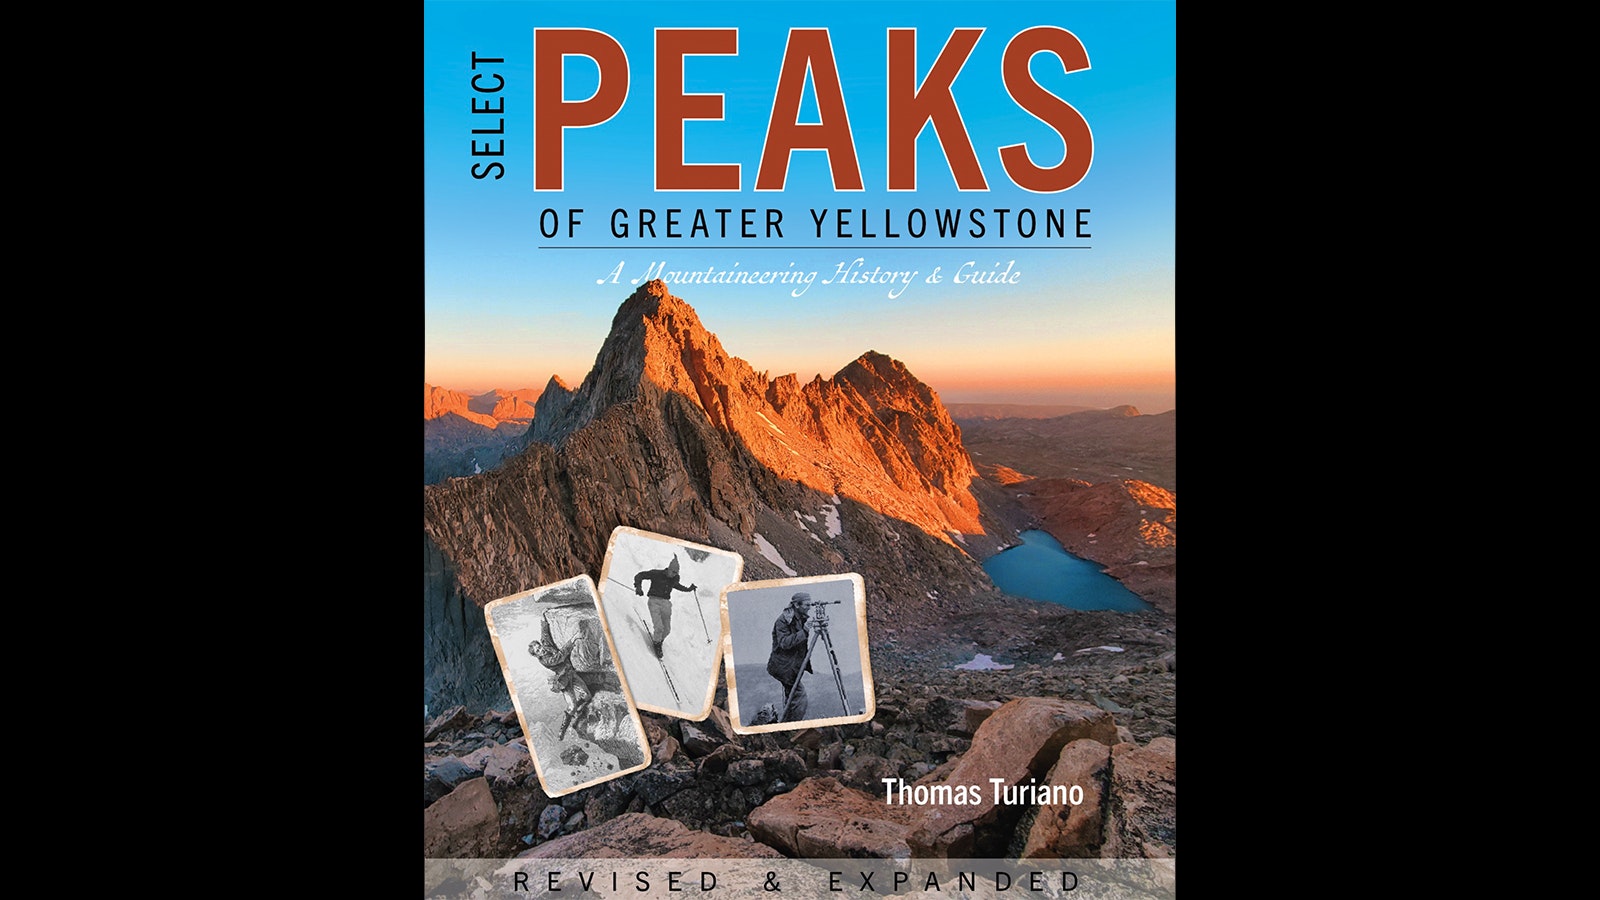 Select Peaks cover 1 20 24